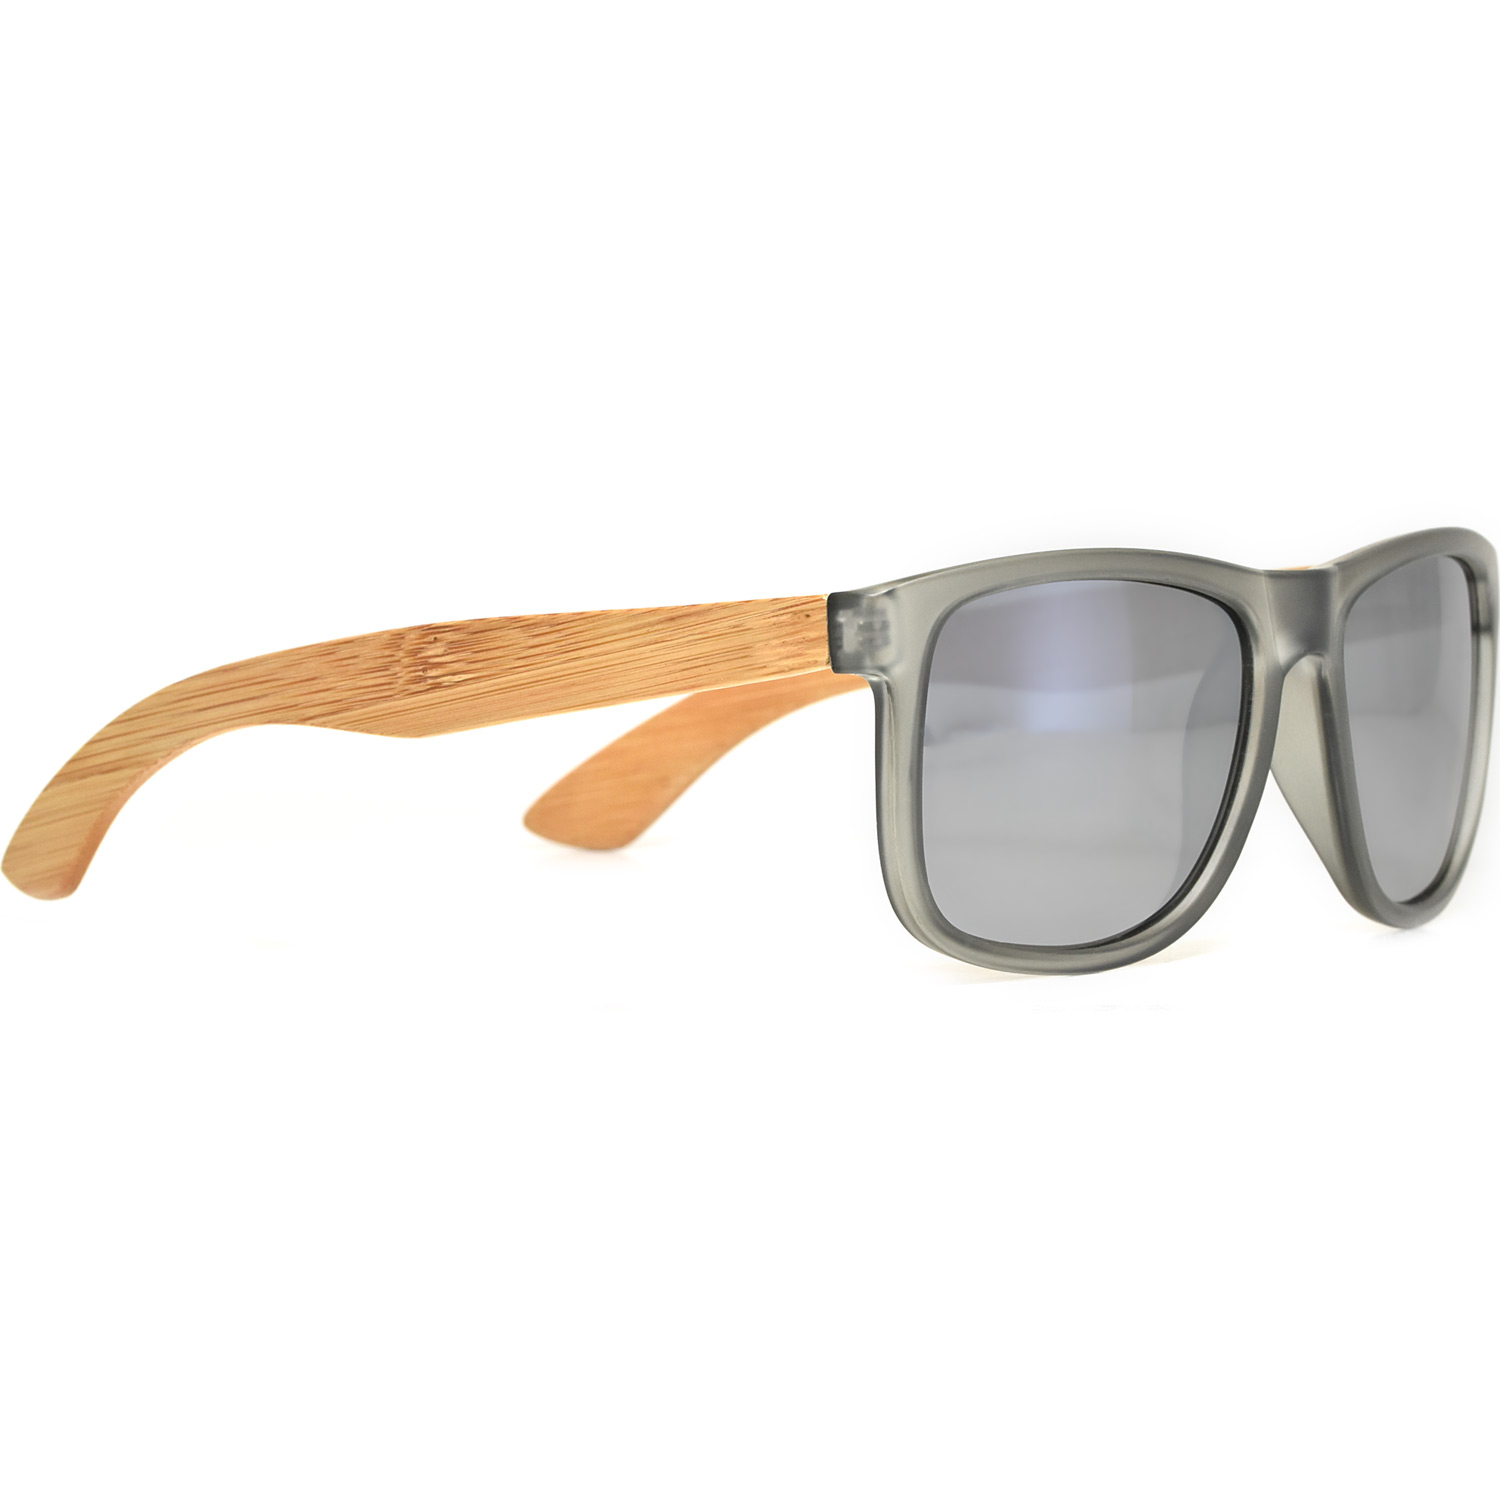 Square bamboo wood sunglasses silver mirrored polarized lenses right